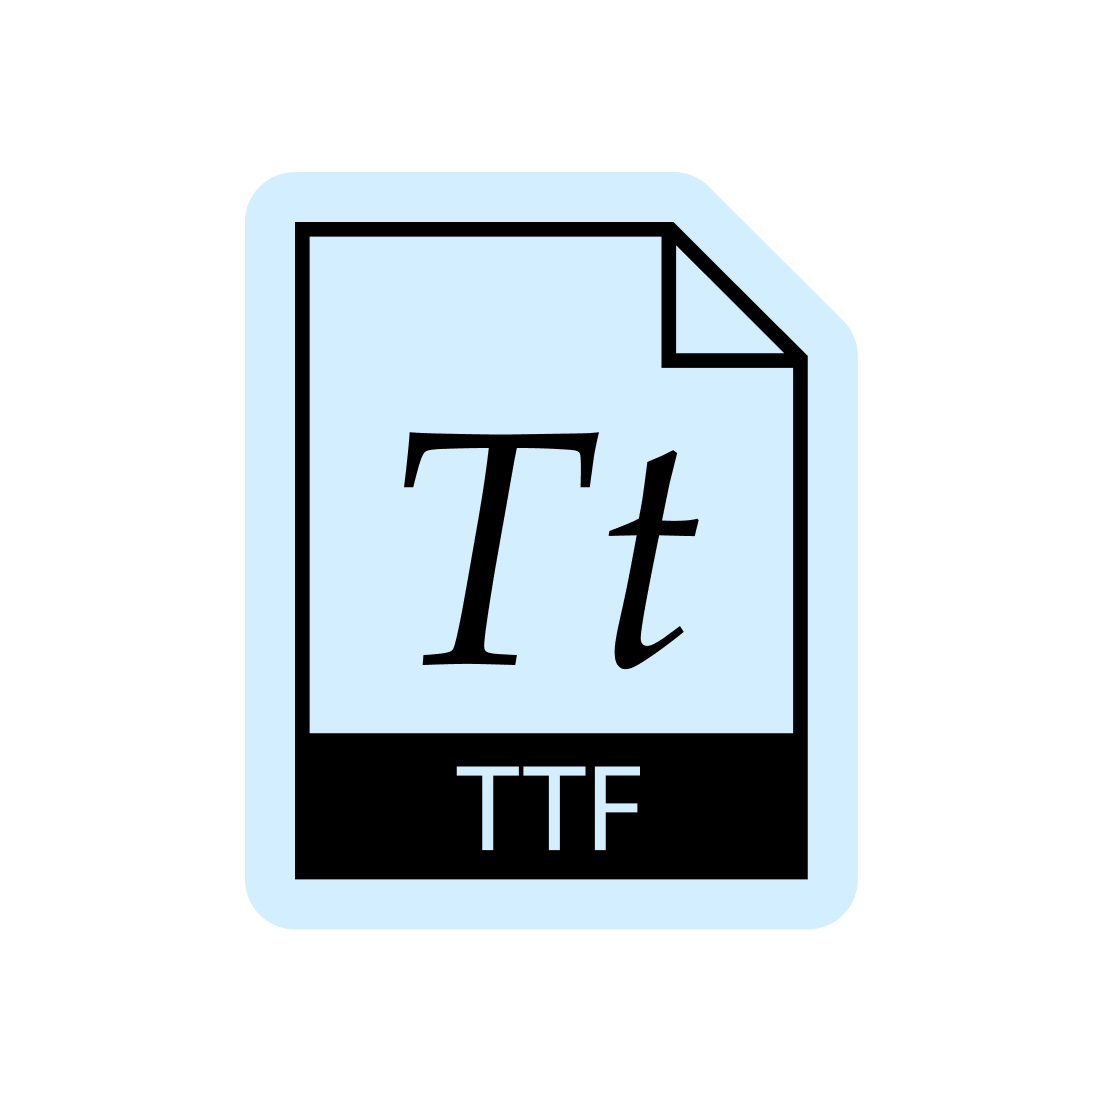 A black icon of a text file, highlighted in light blue